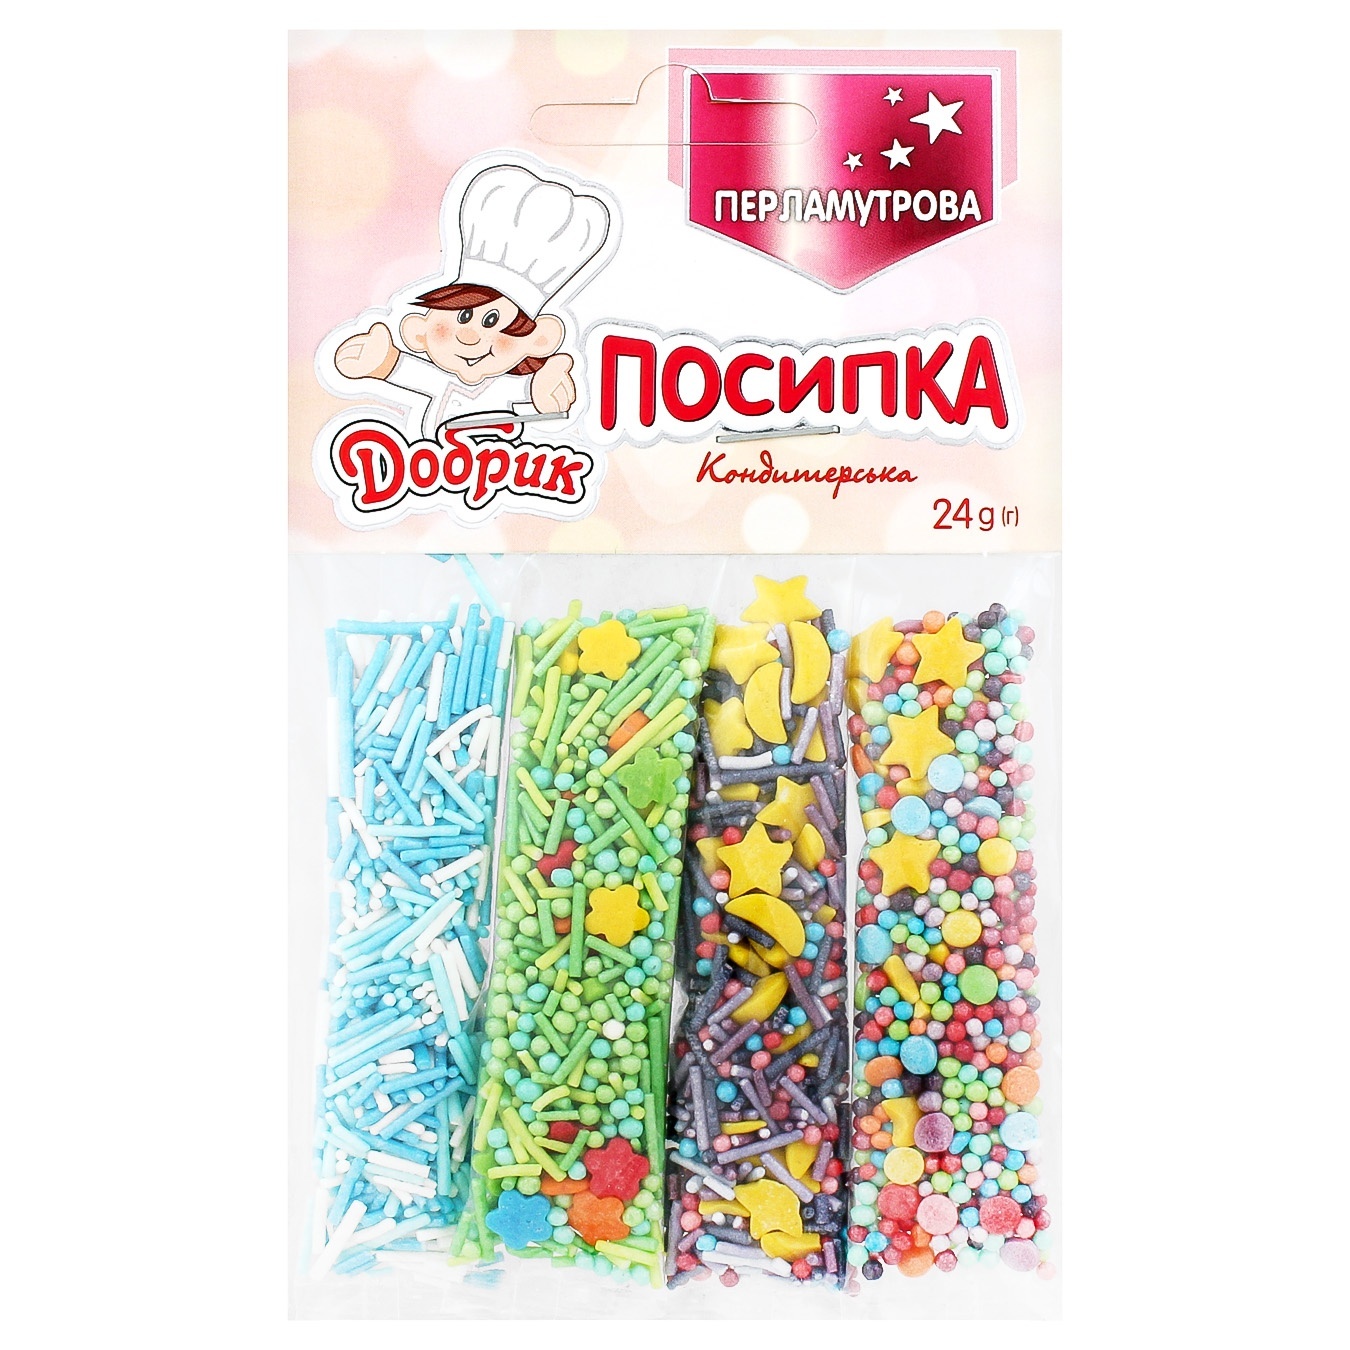 Lubystok A set of sprinkles shaped in stacks